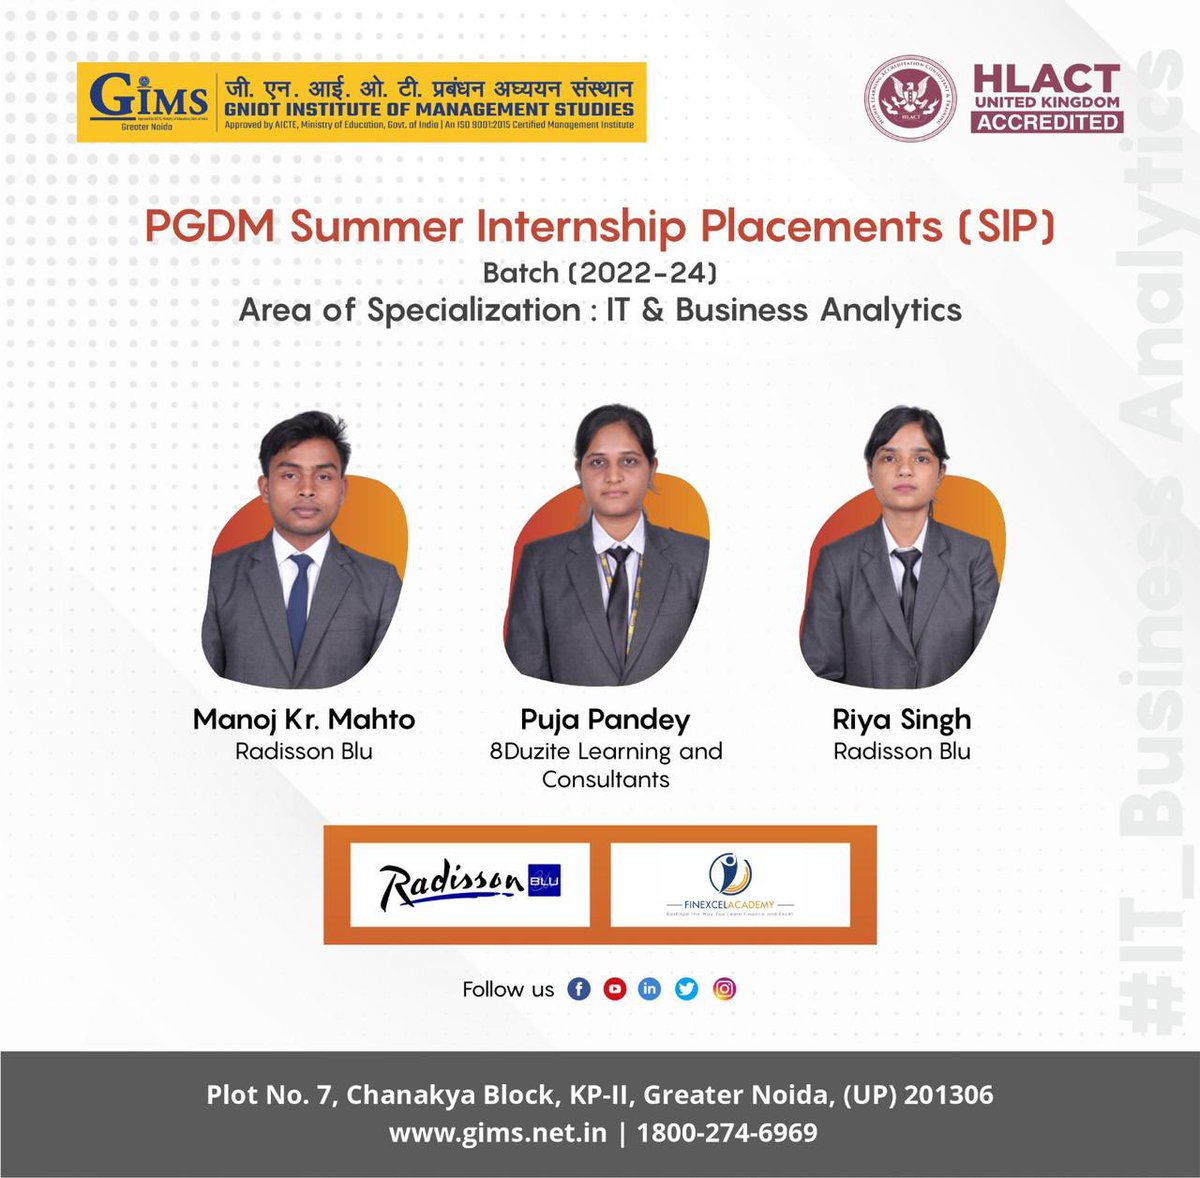 Patience, persistence and perspiration make an unbeatable combination for success. -Napoleon Hill GIMS proudly announces an excellent season of Summer Internships for PGDM Batch 2022-24 (IT & Business Analytics Specialization) #gniot #Gims #GreaterNoida #GreaterNoidaCollege #PGDM